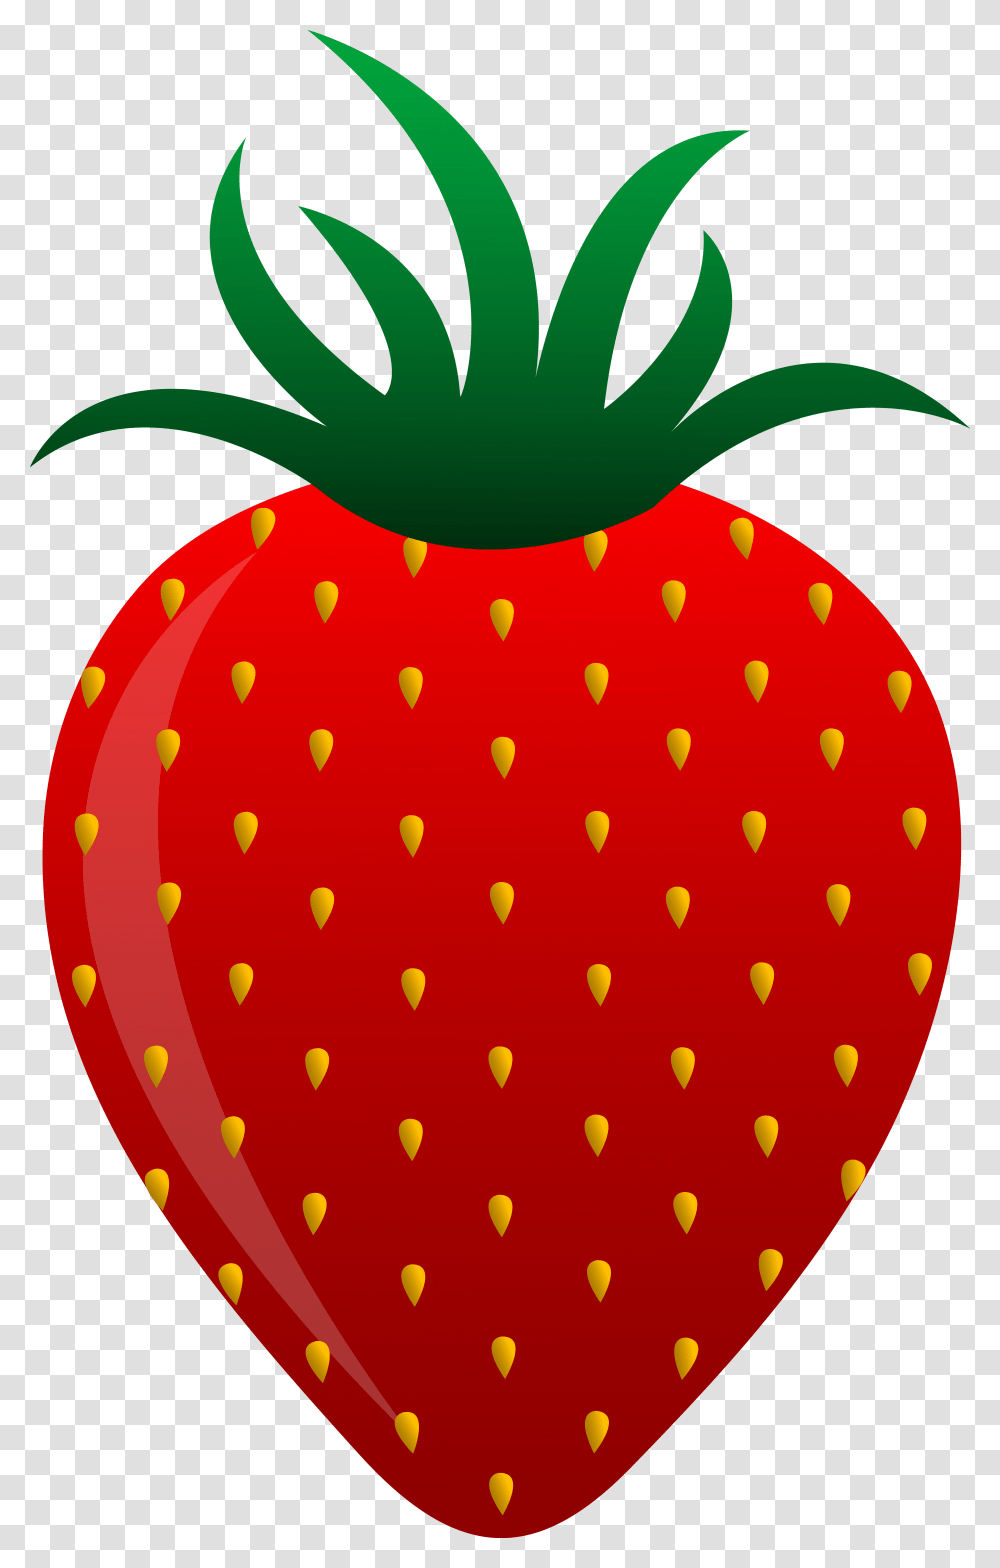 Strawberries Strawberry, Plant, Fruit, Food, Pineapple Transparent Png